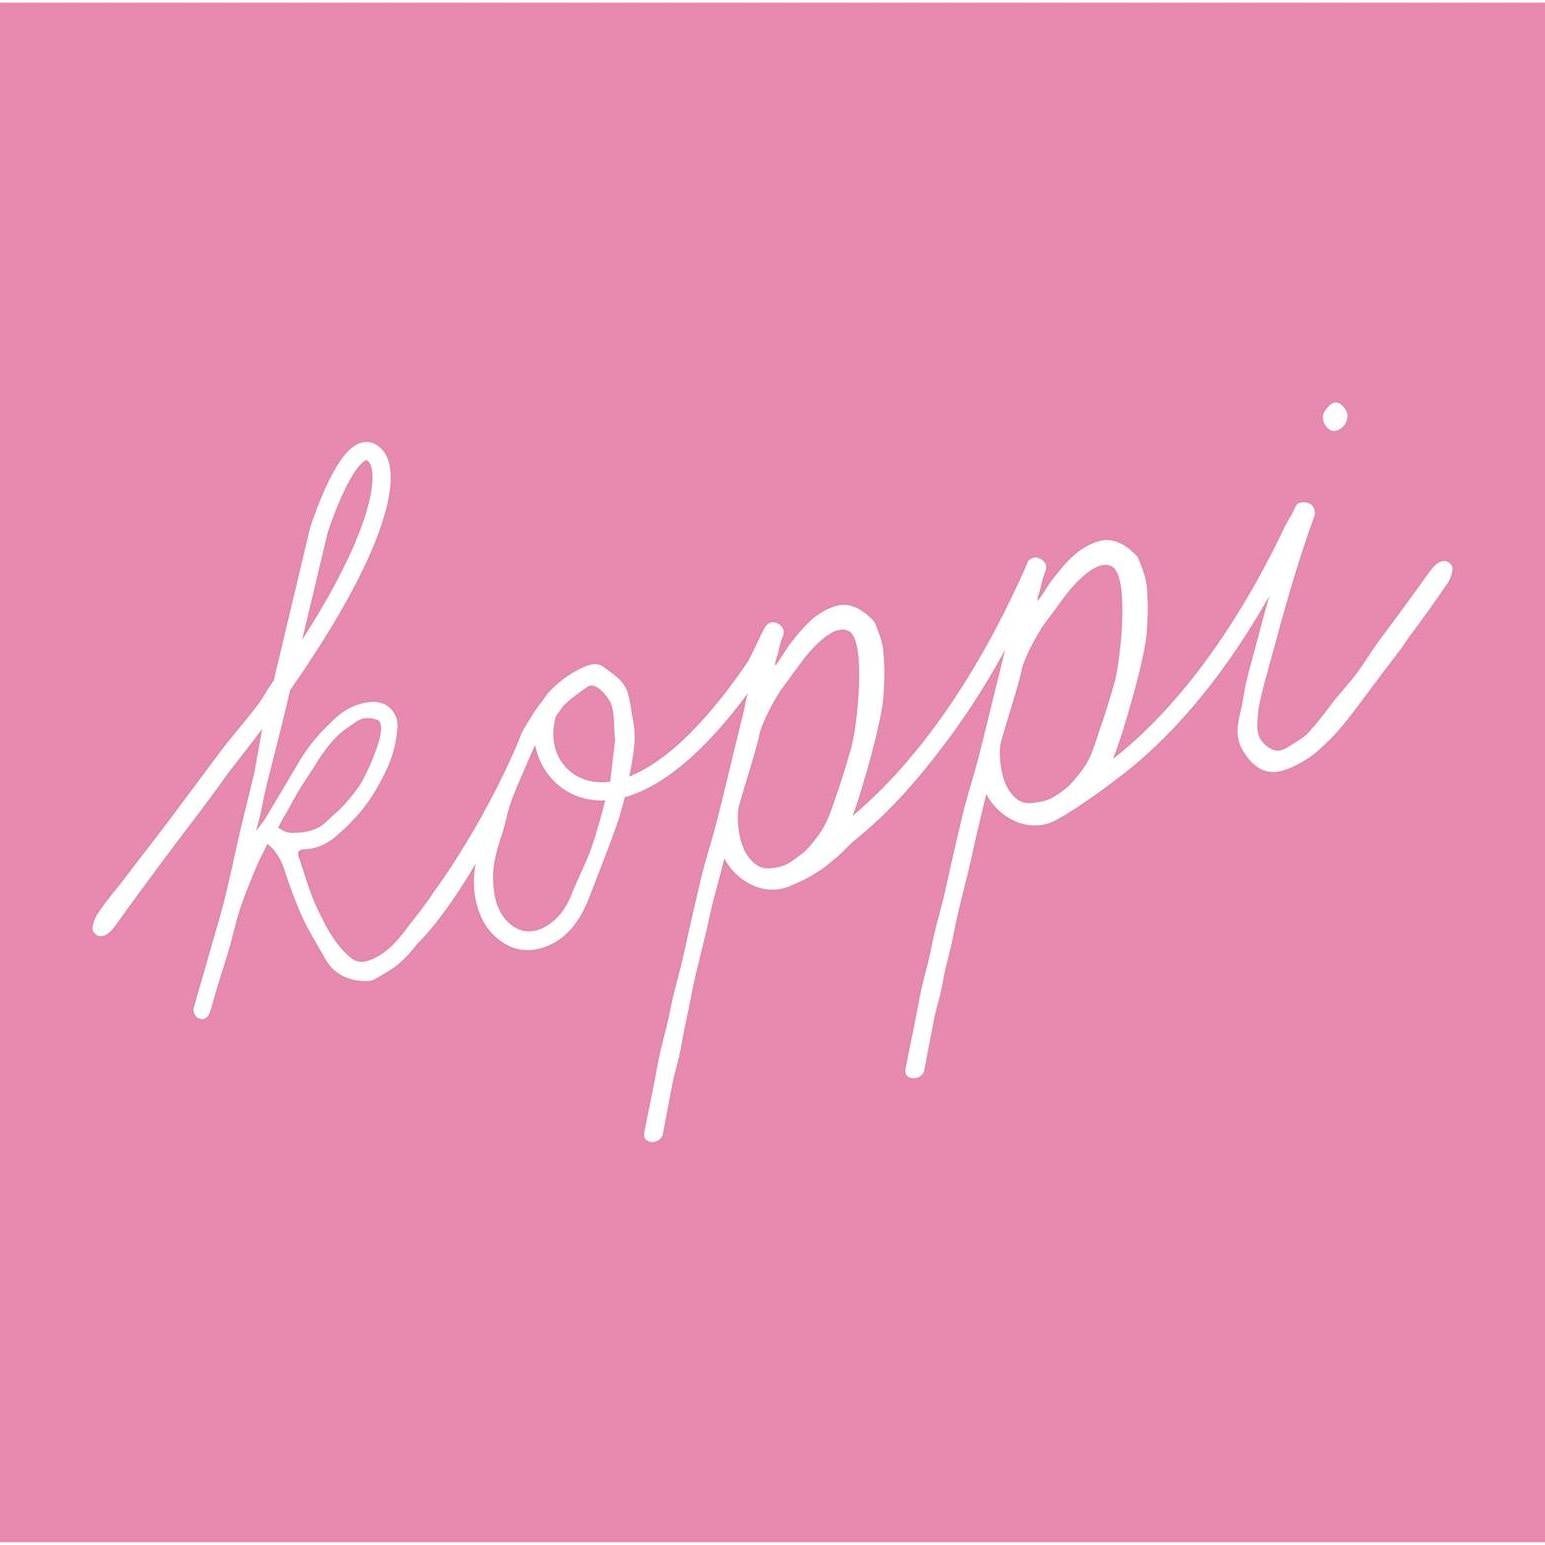 Koppi - Swedish Specialty Coffee Roaster on Curious Buds Luxembourg